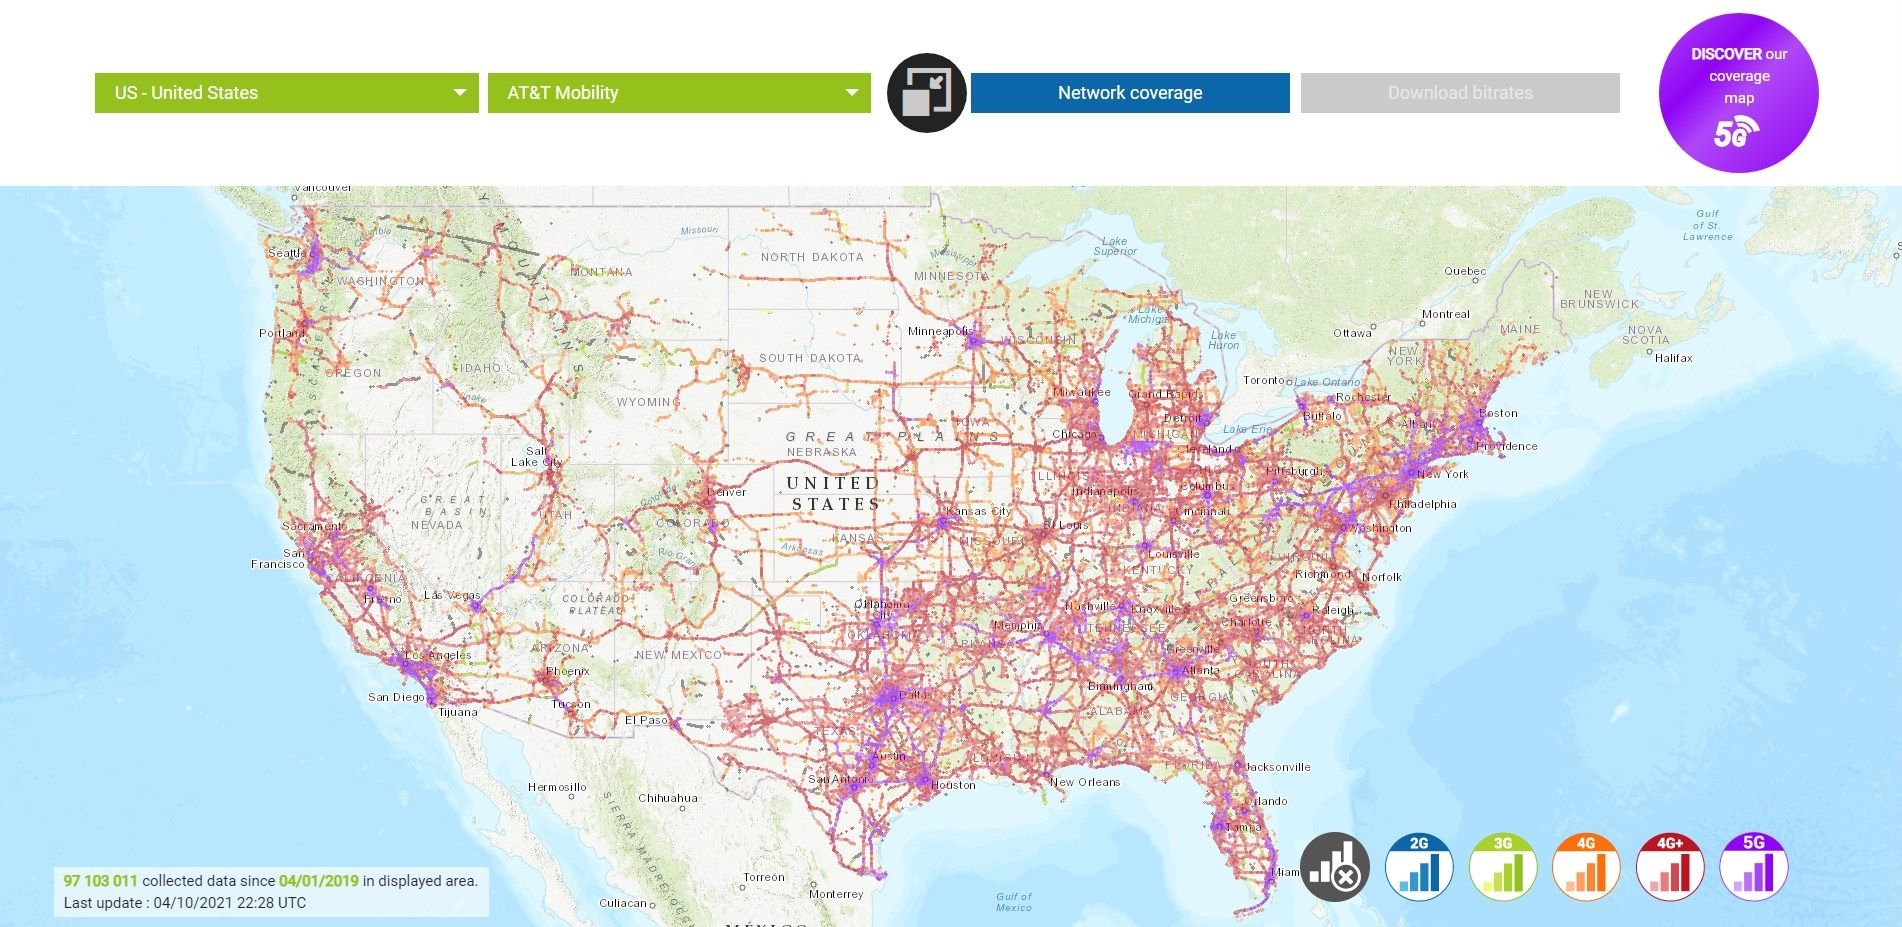 at&t 5g network coverage us